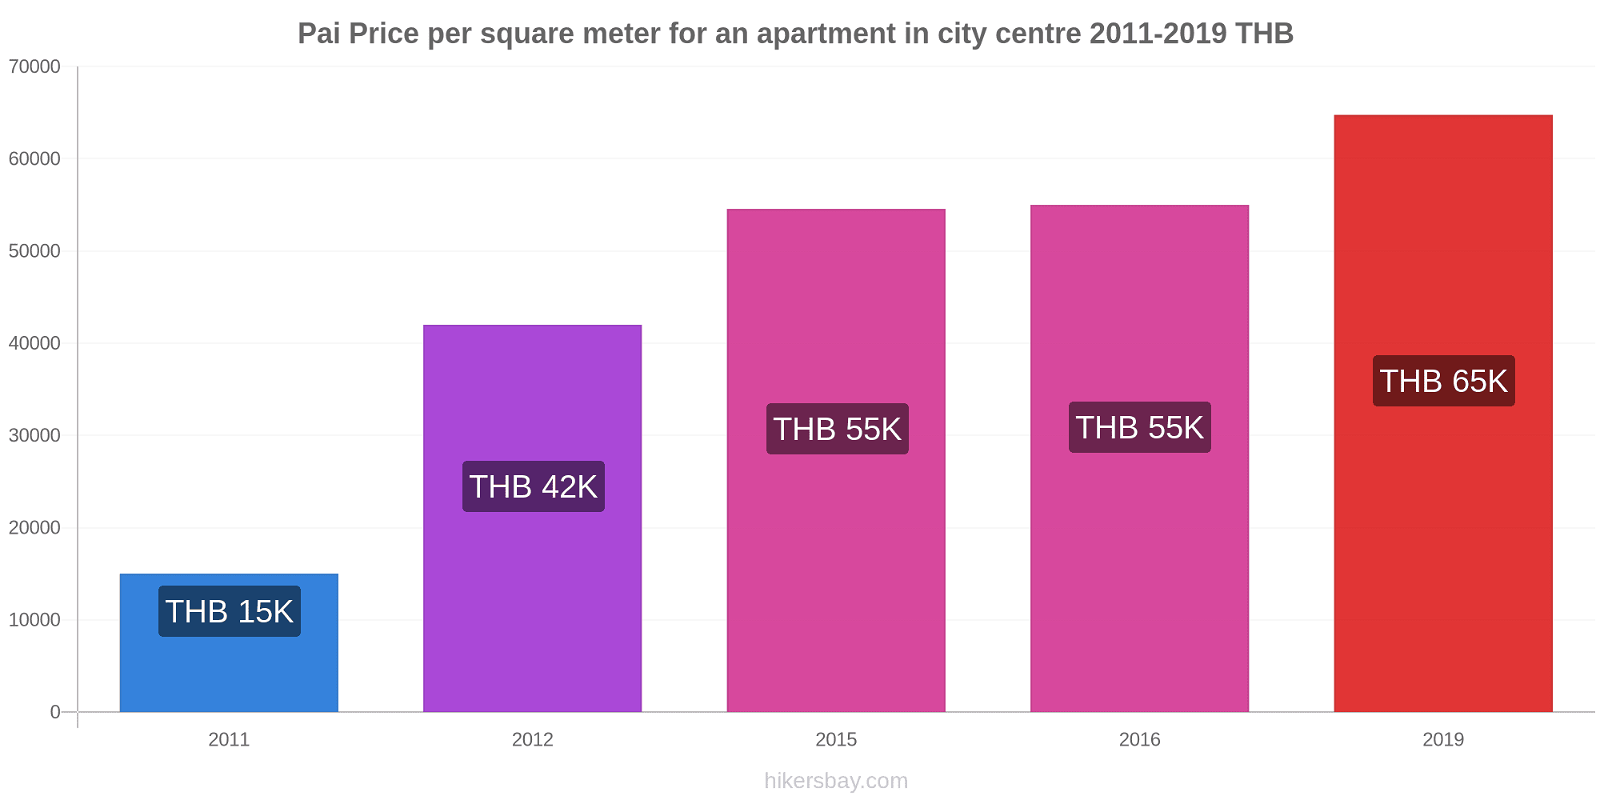 Pai price changes Price per square meter for an apartment in city centre hikersbay.com